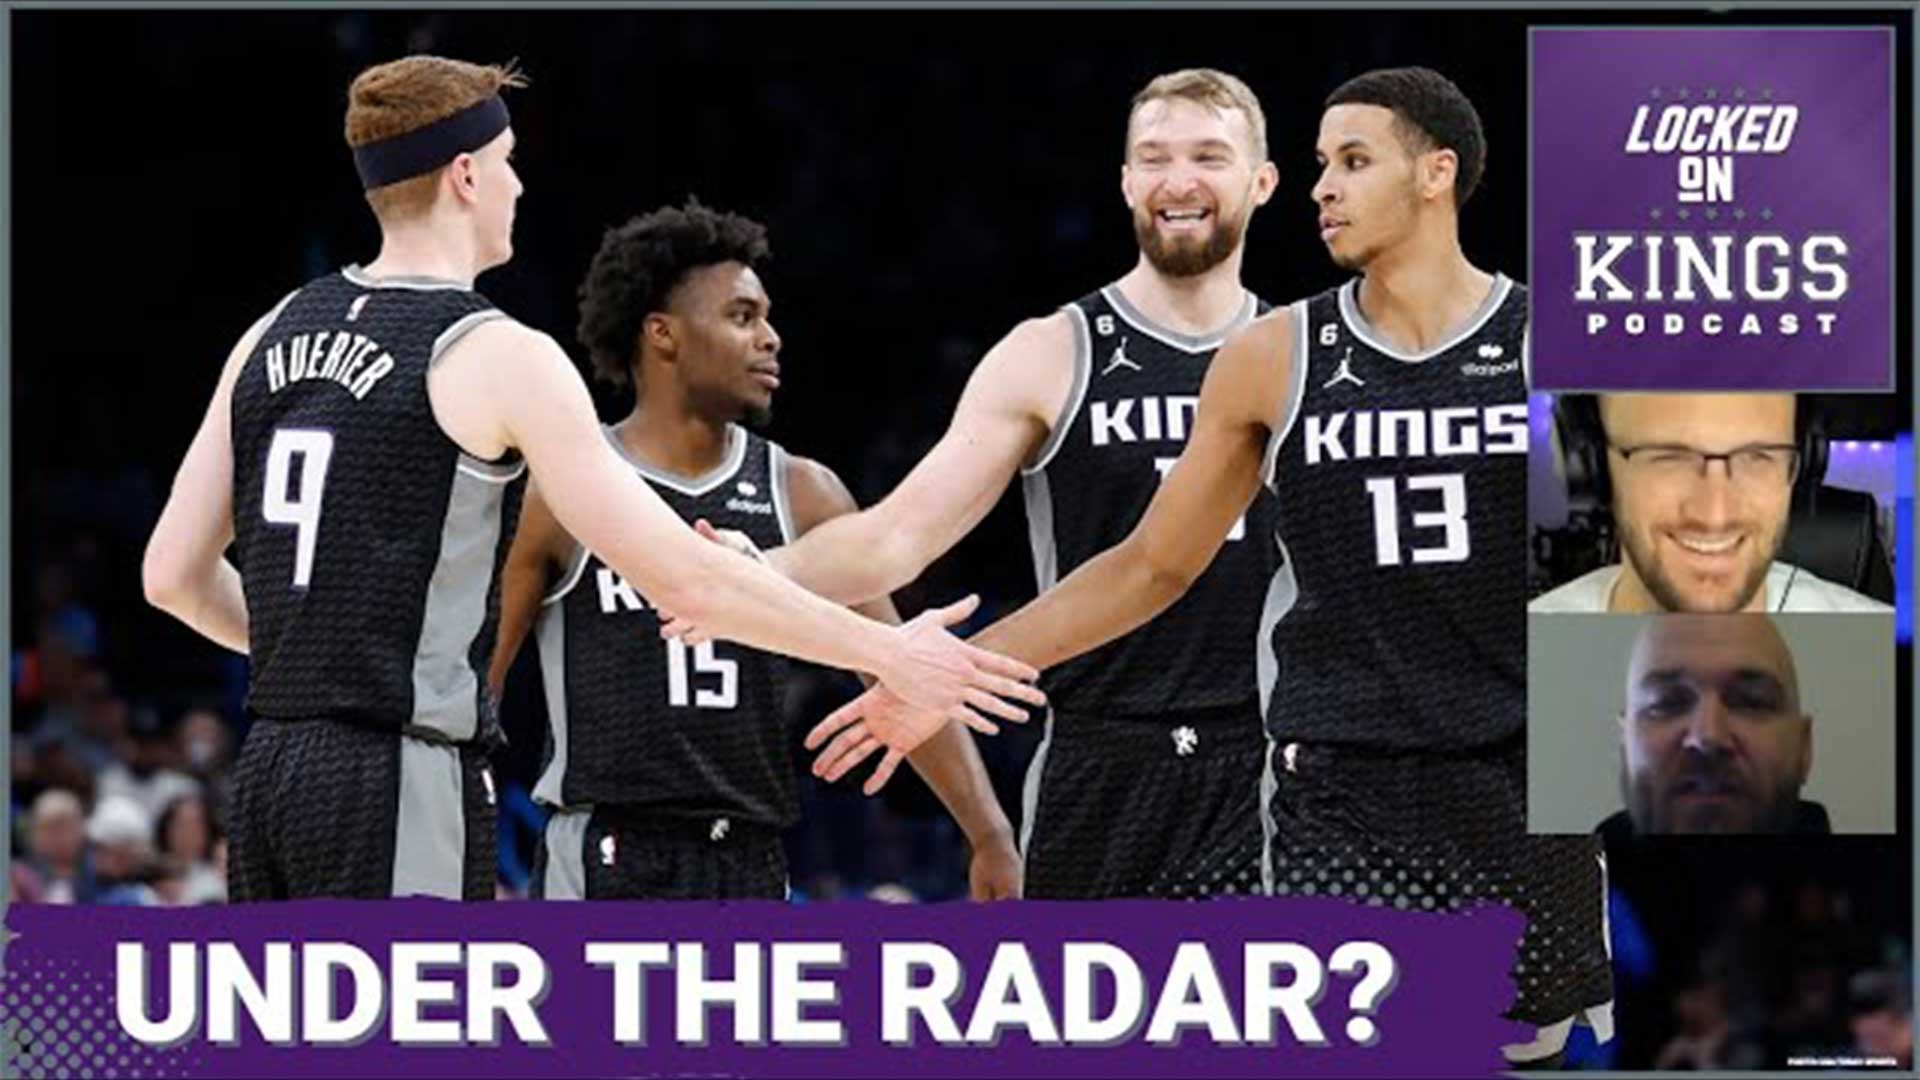 Matt George is joined by his former sports radio colleague JayMarZZ to discuss how the Sacramento Kings are still an under-the-radar team in the Western Conference.